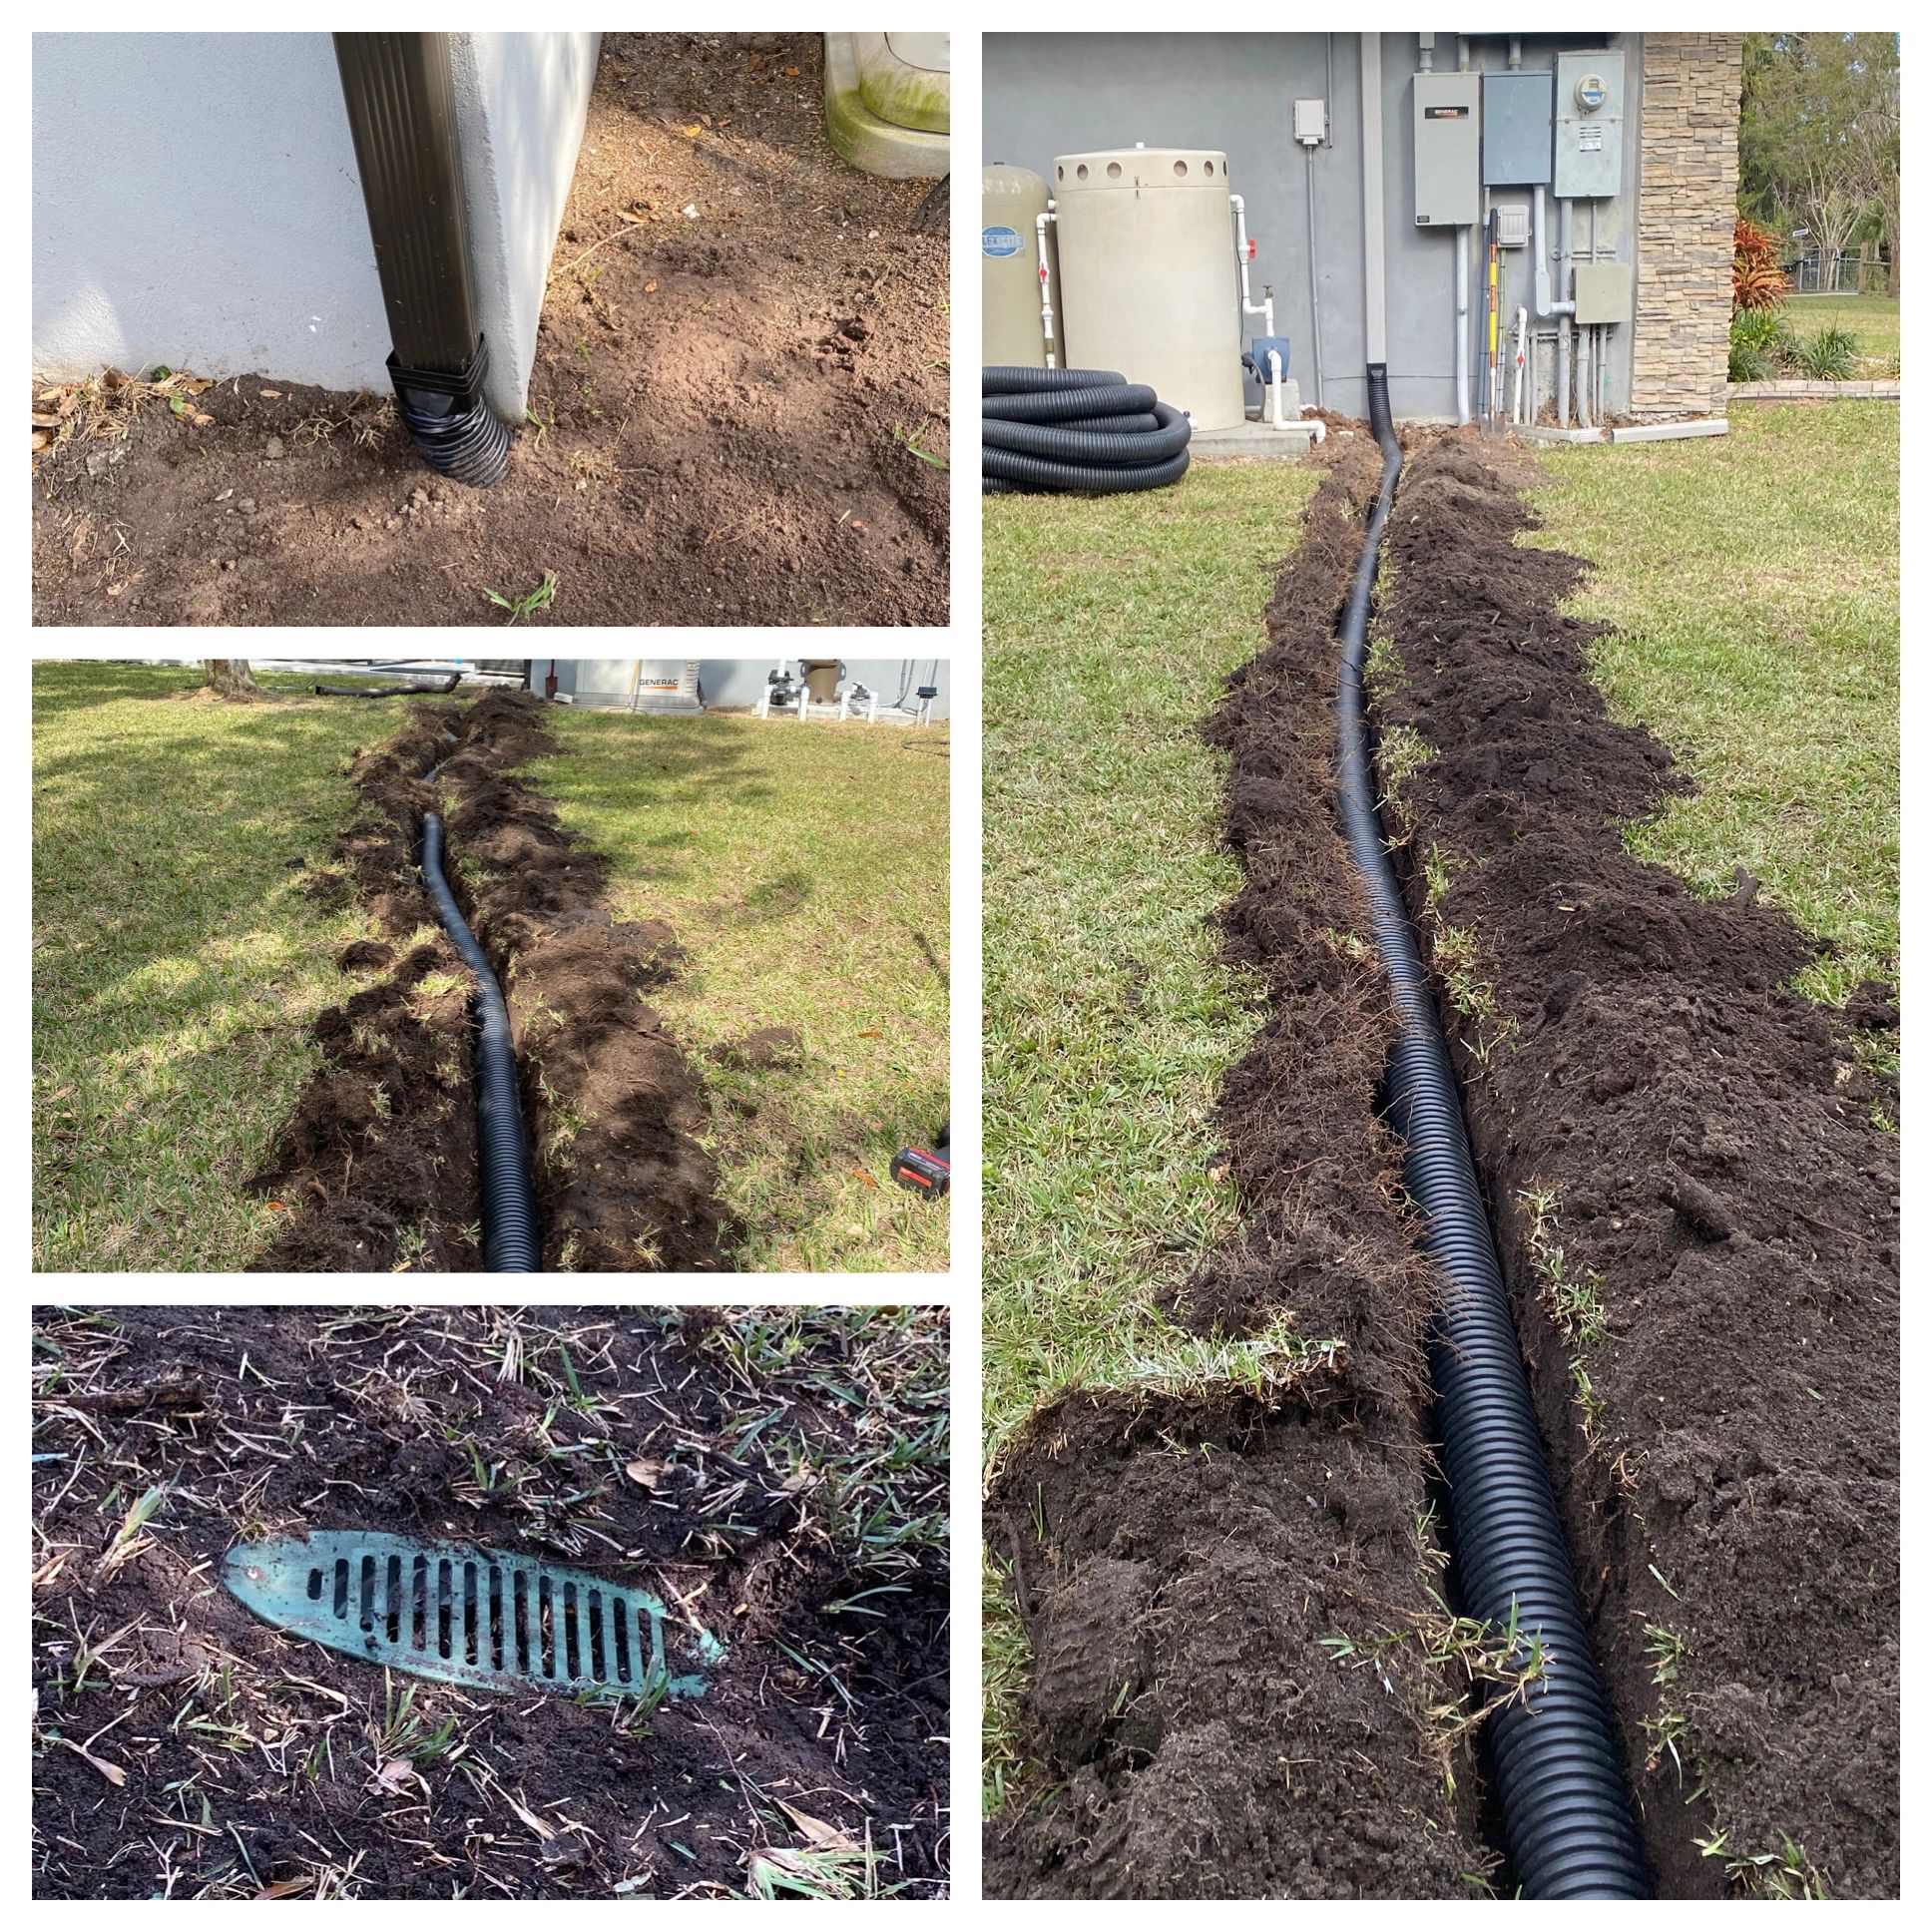 Downspout drains are routed away from the residence to prevent erosion around your properties founda